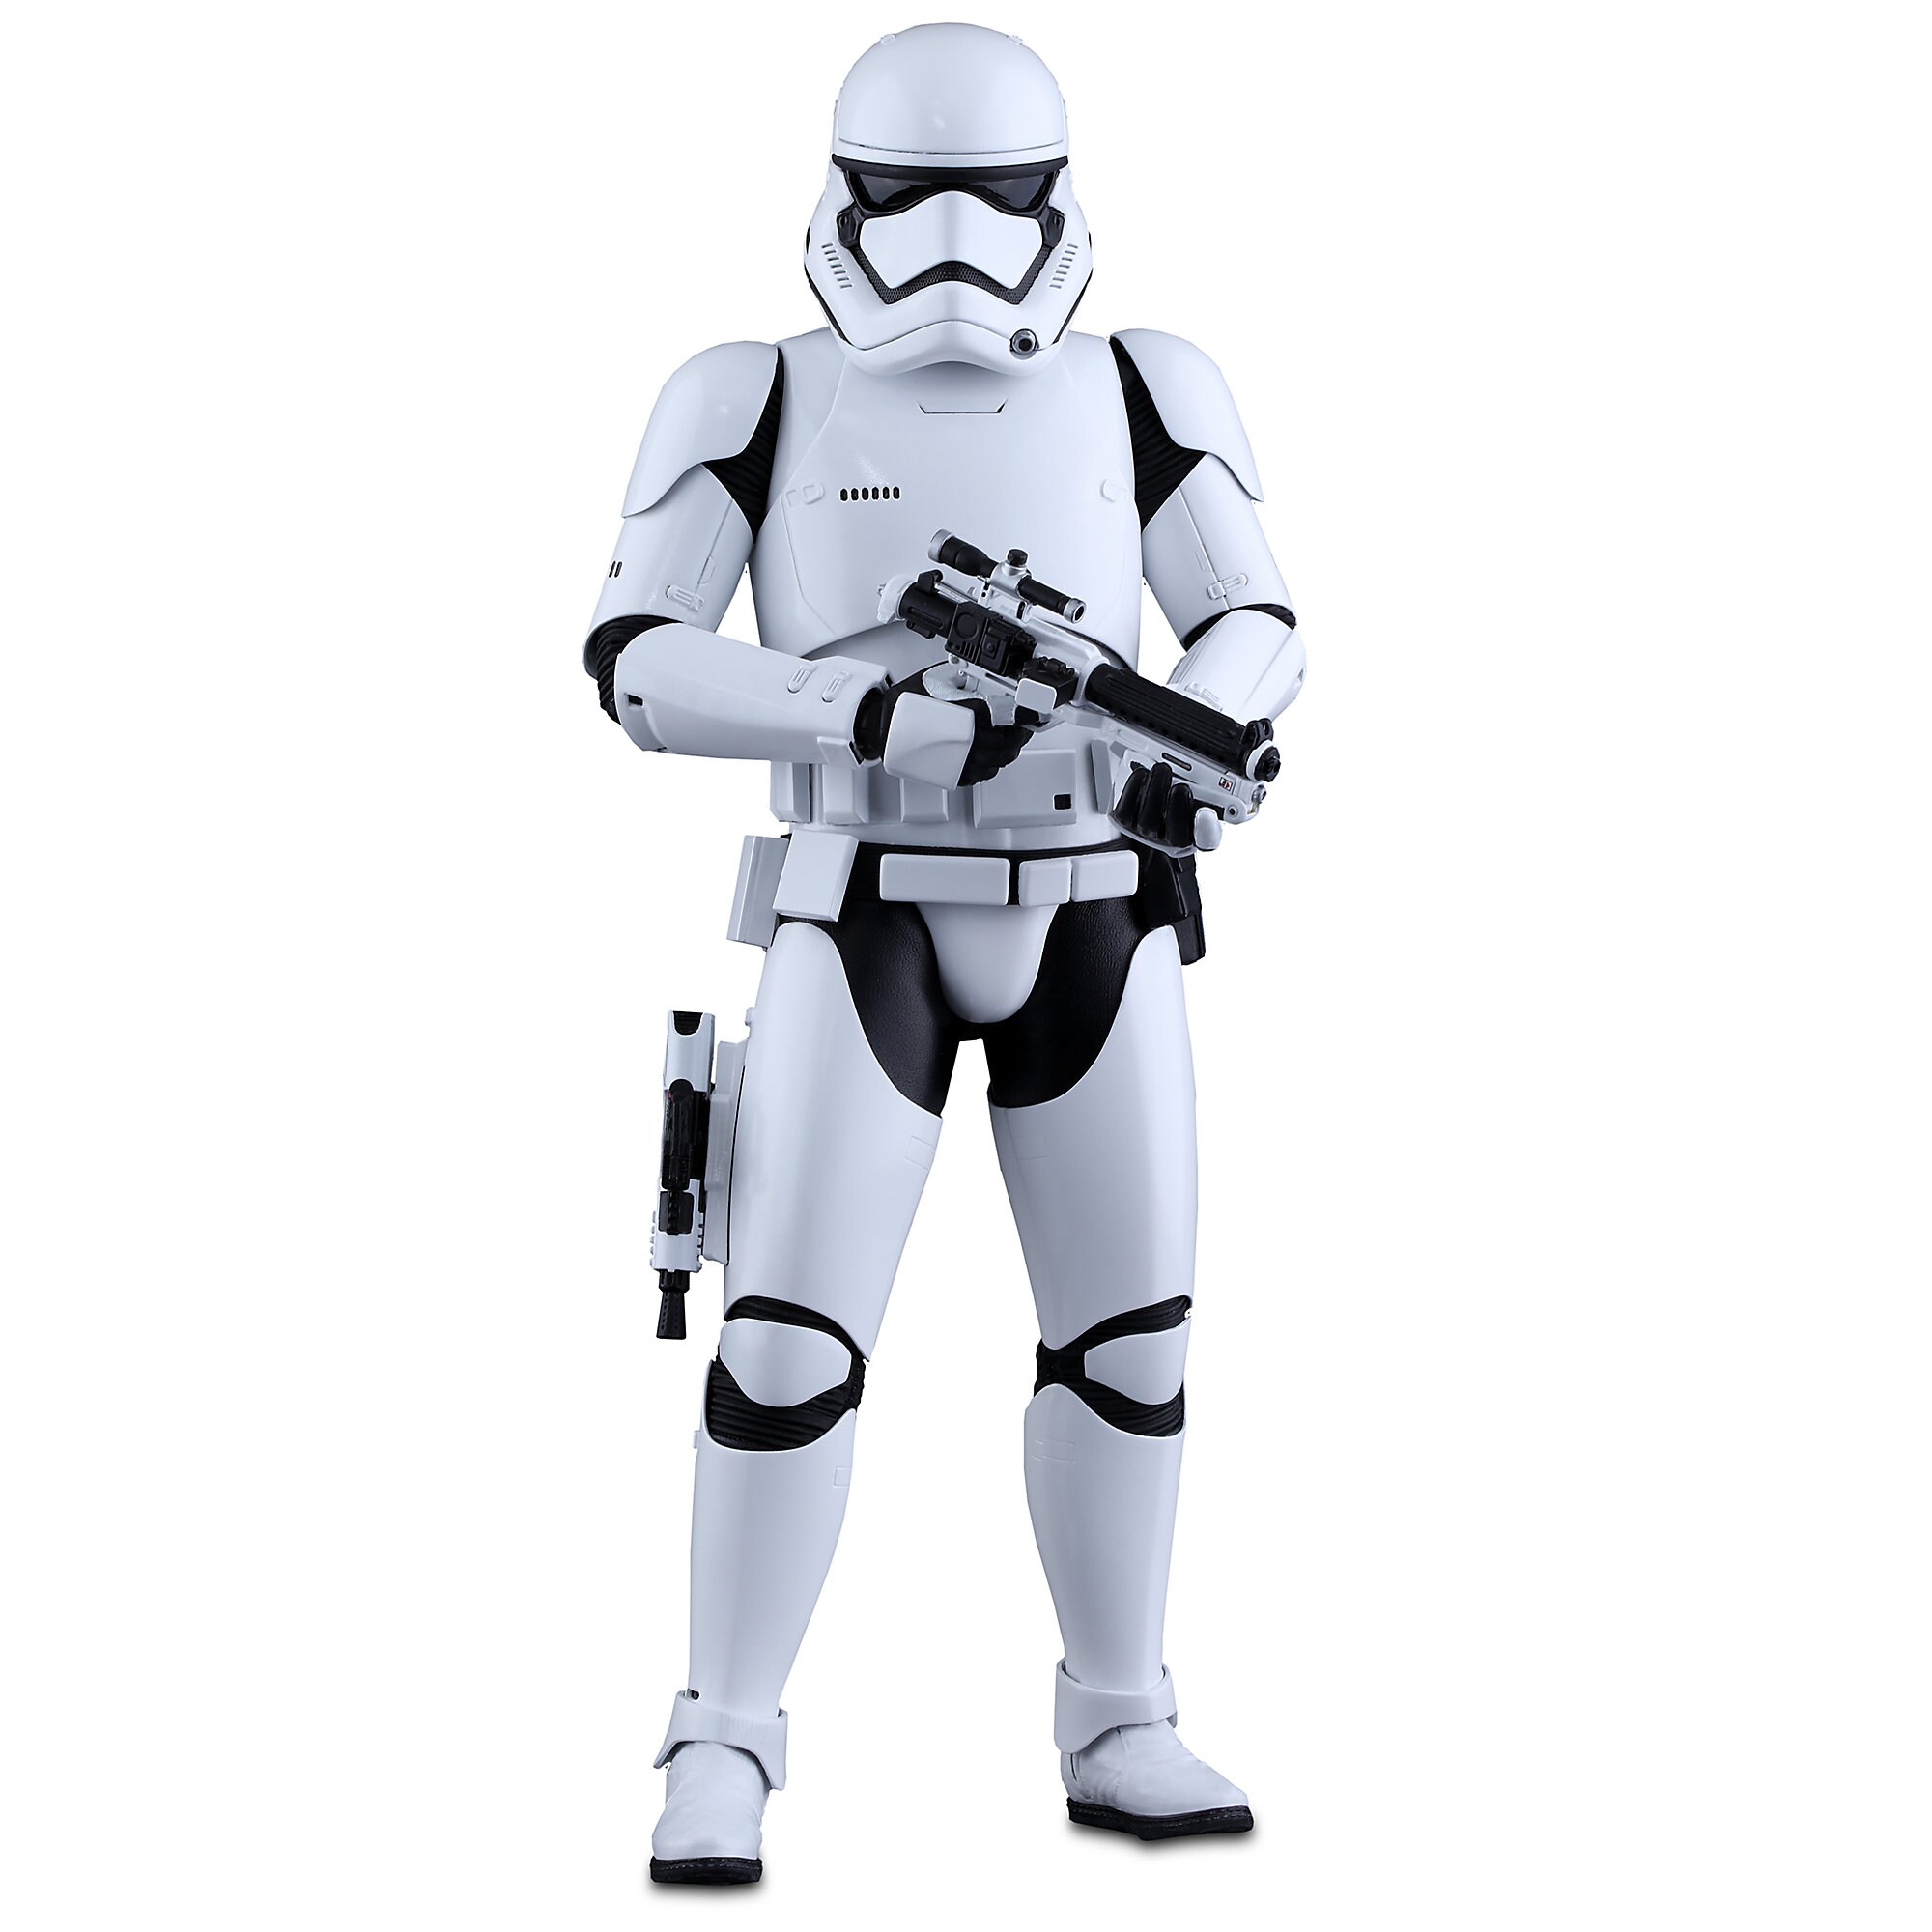 First Order Stormtrooper Sixth Scale Figure by Hot Toys - Star Wars